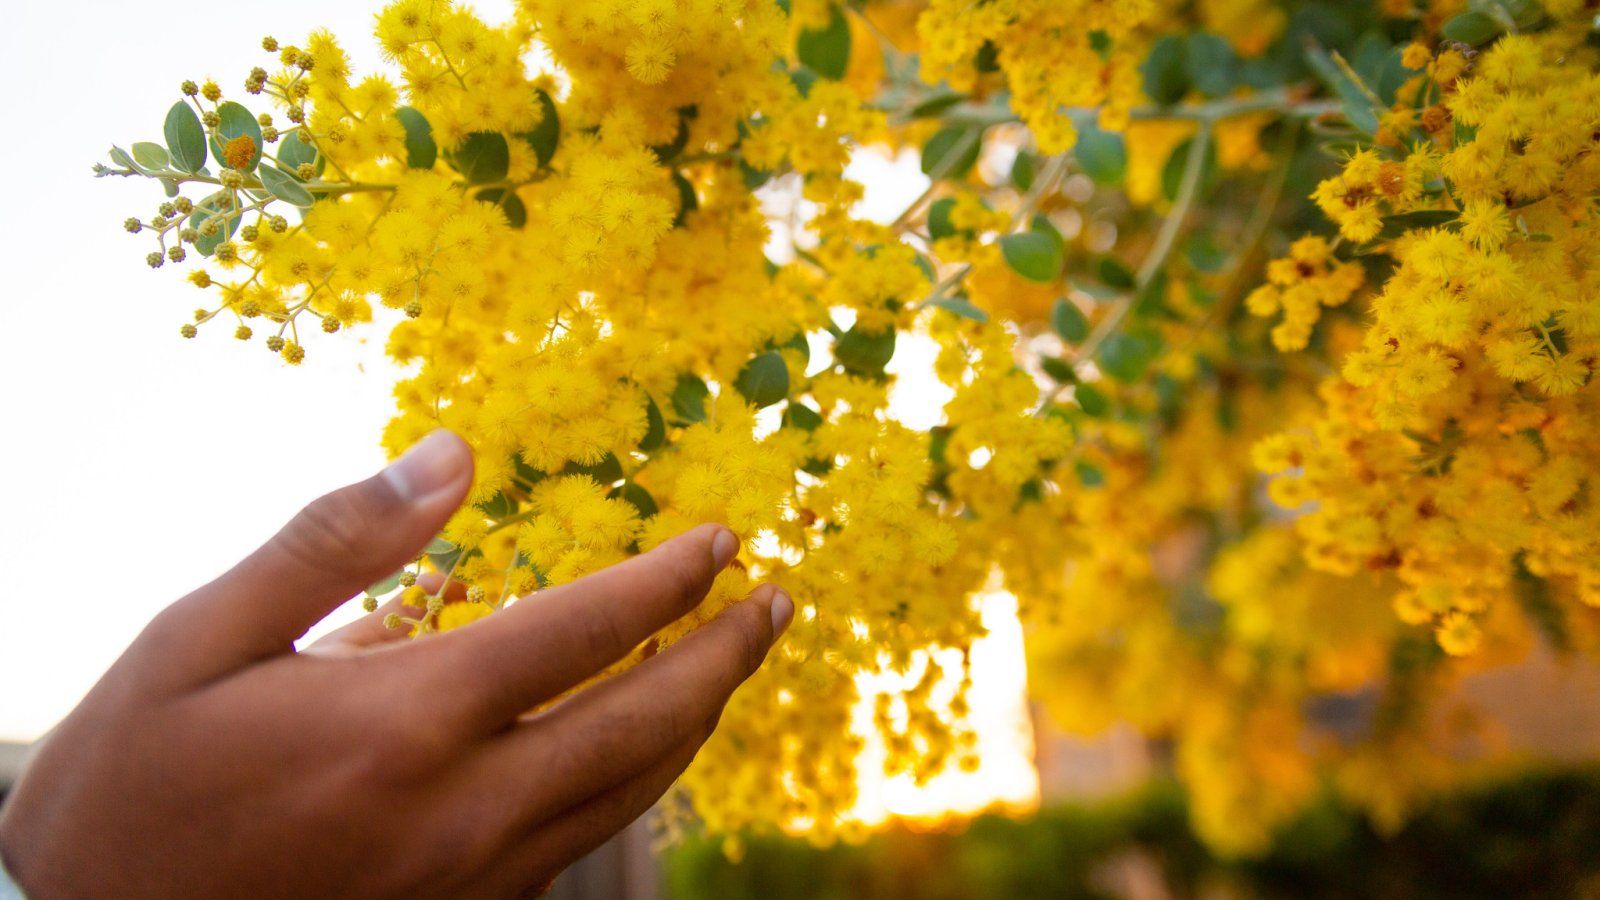 Hands grab at yellow flowers